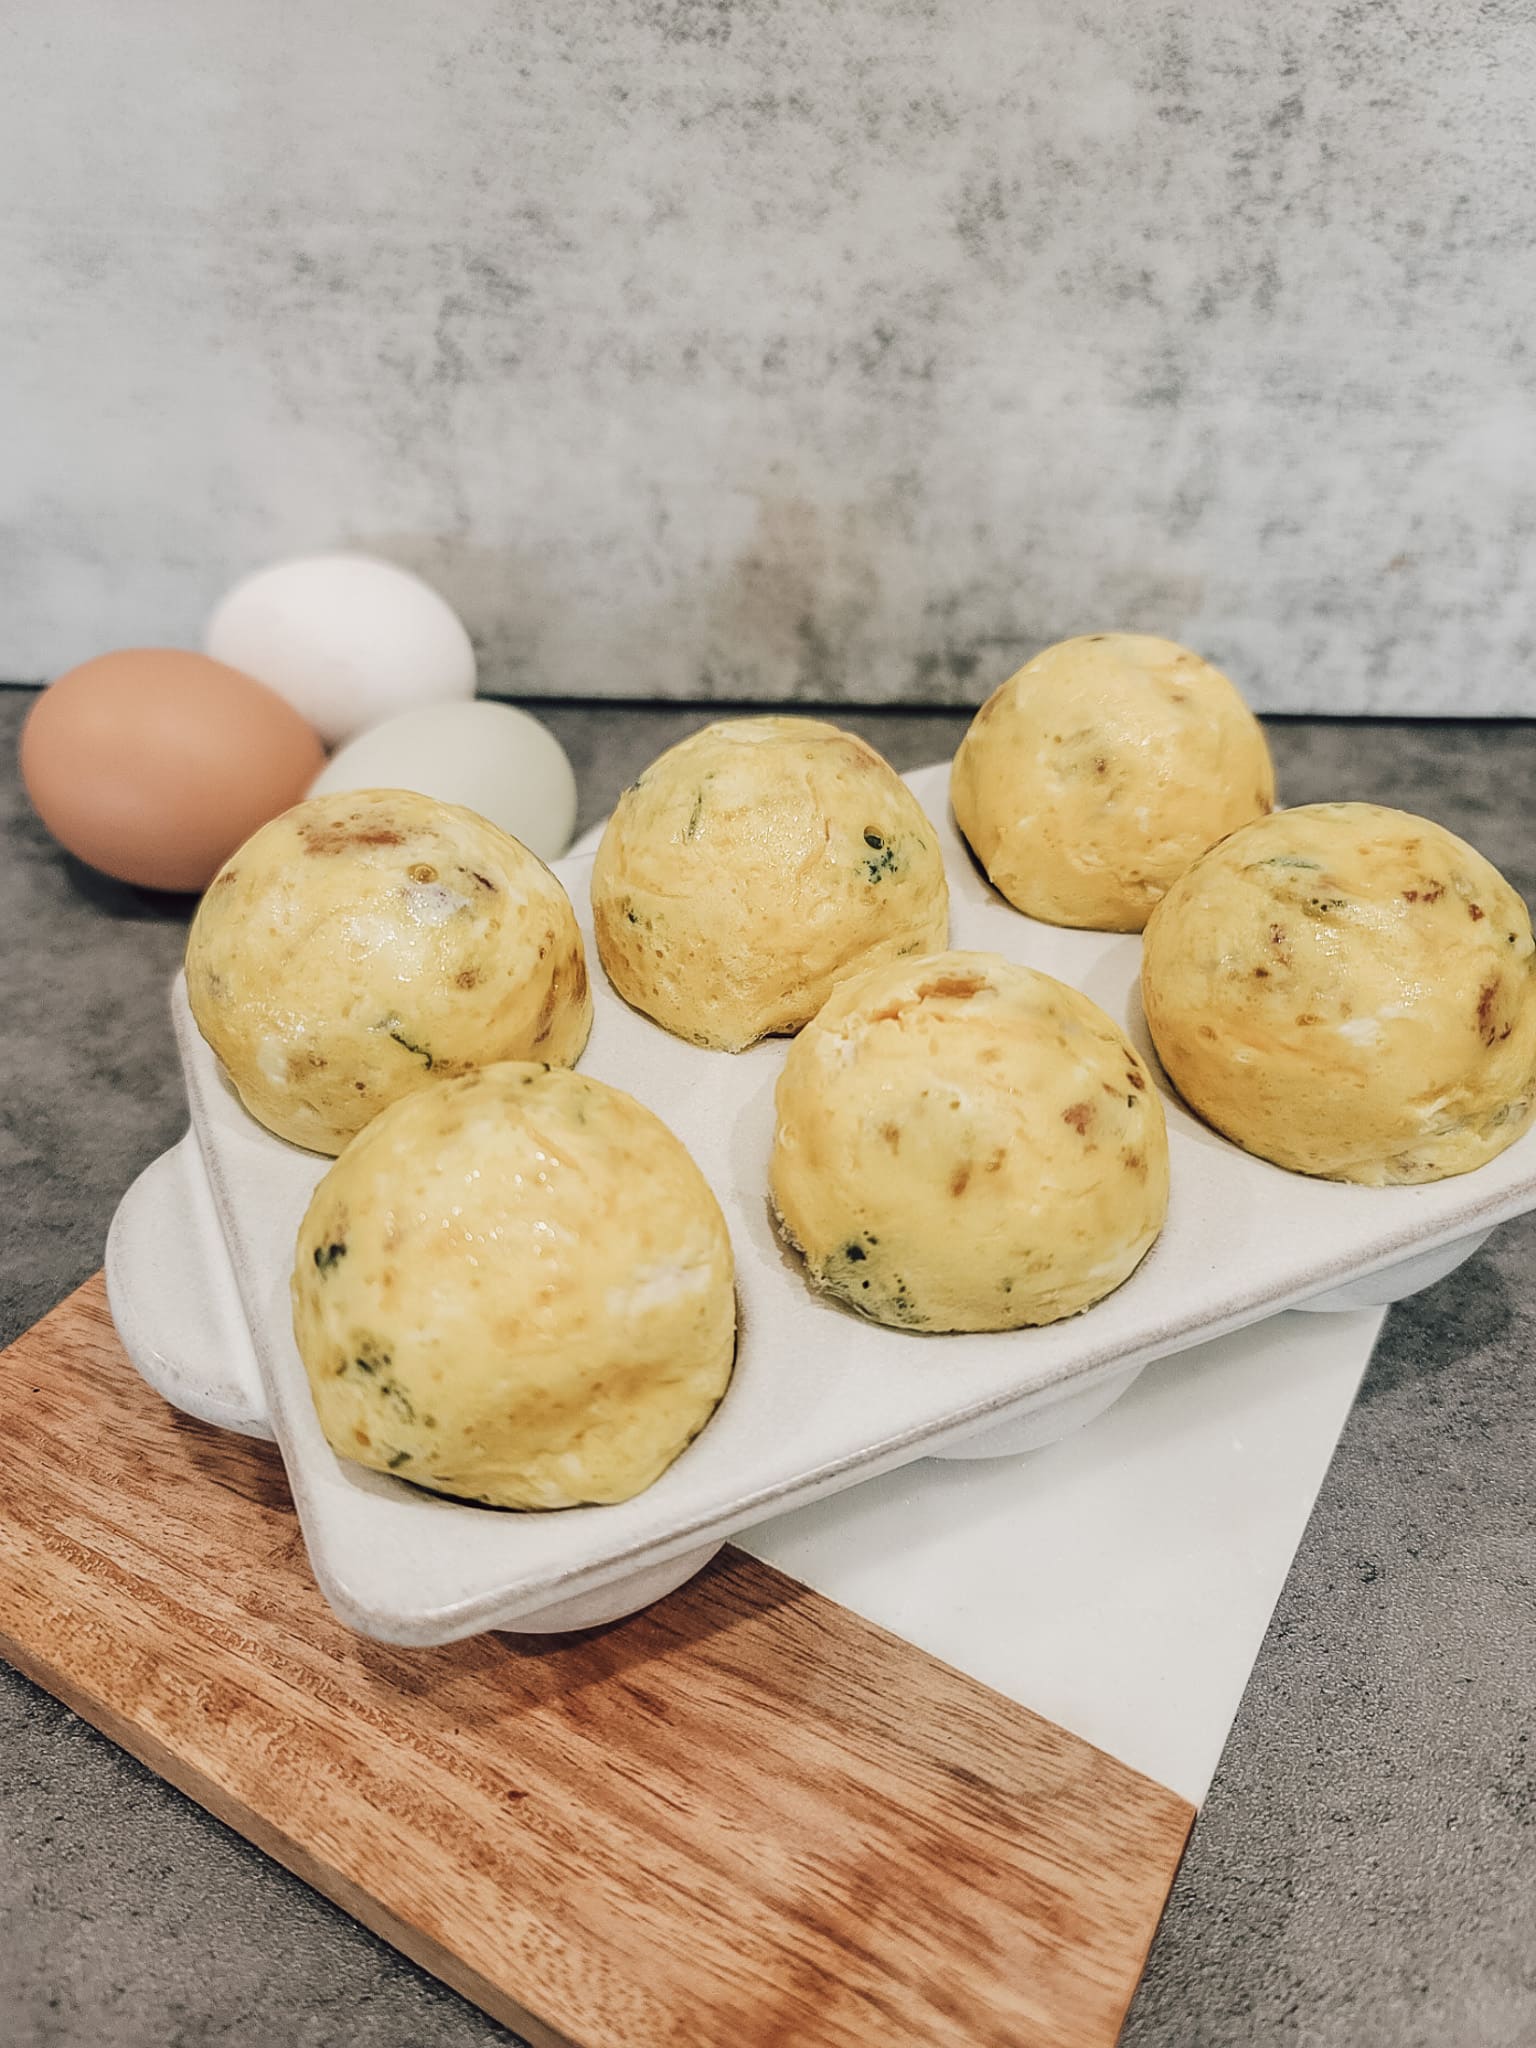 instant pot egg bites. Set pressure and cook on manual for 10 minutes. Make sure the Instant Pot depressurizes before you take the egg bites out. These can be stored in the refrigerator for up to one week.